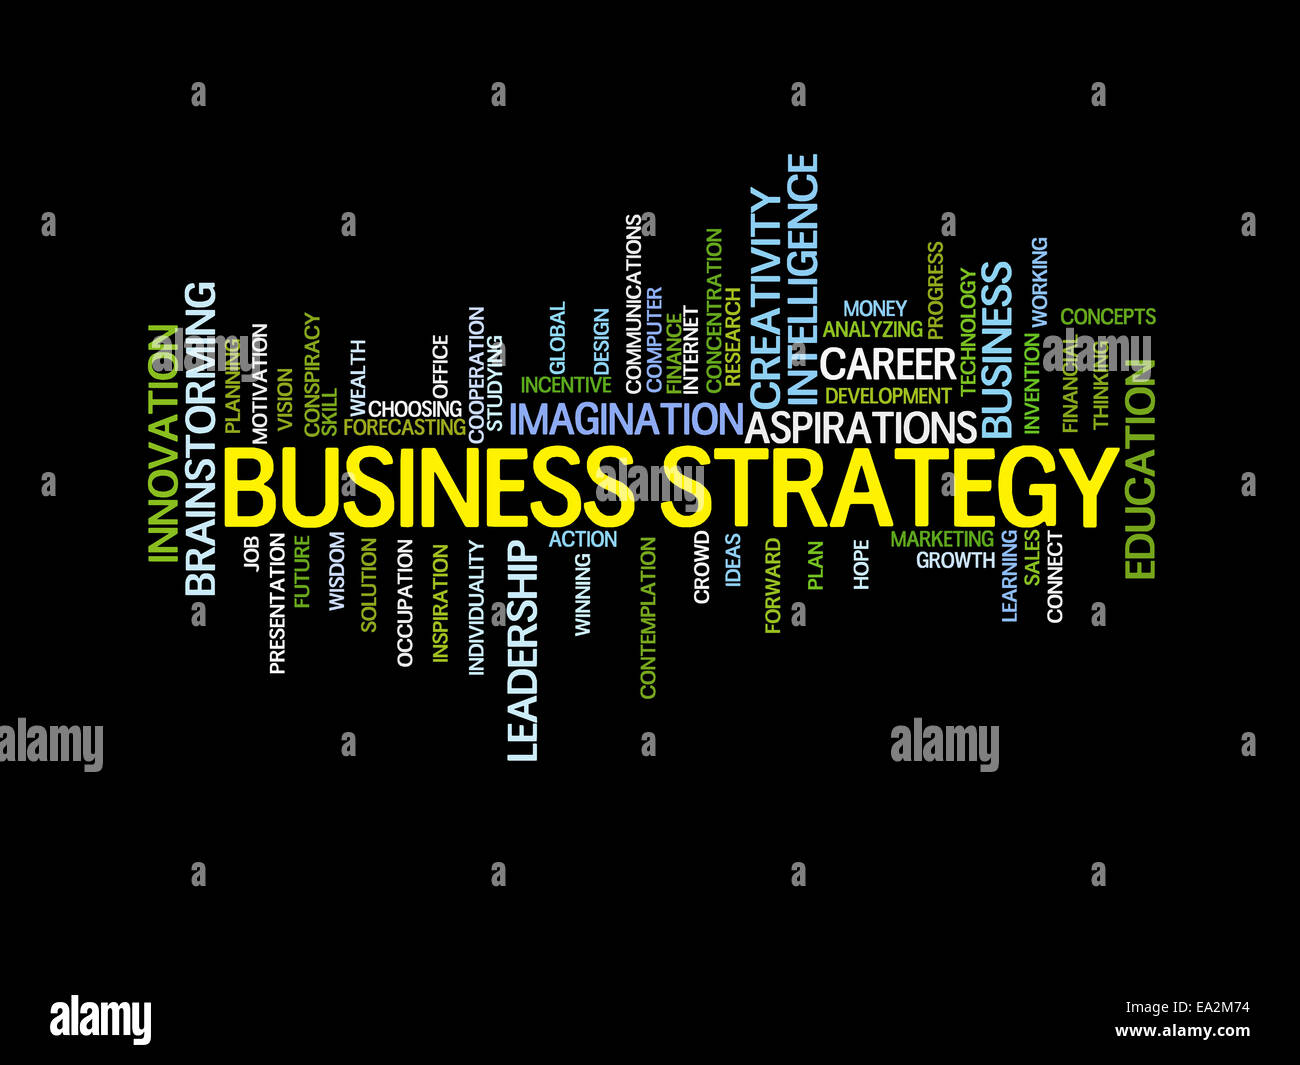 business strategy concept word cloud Stock Photo